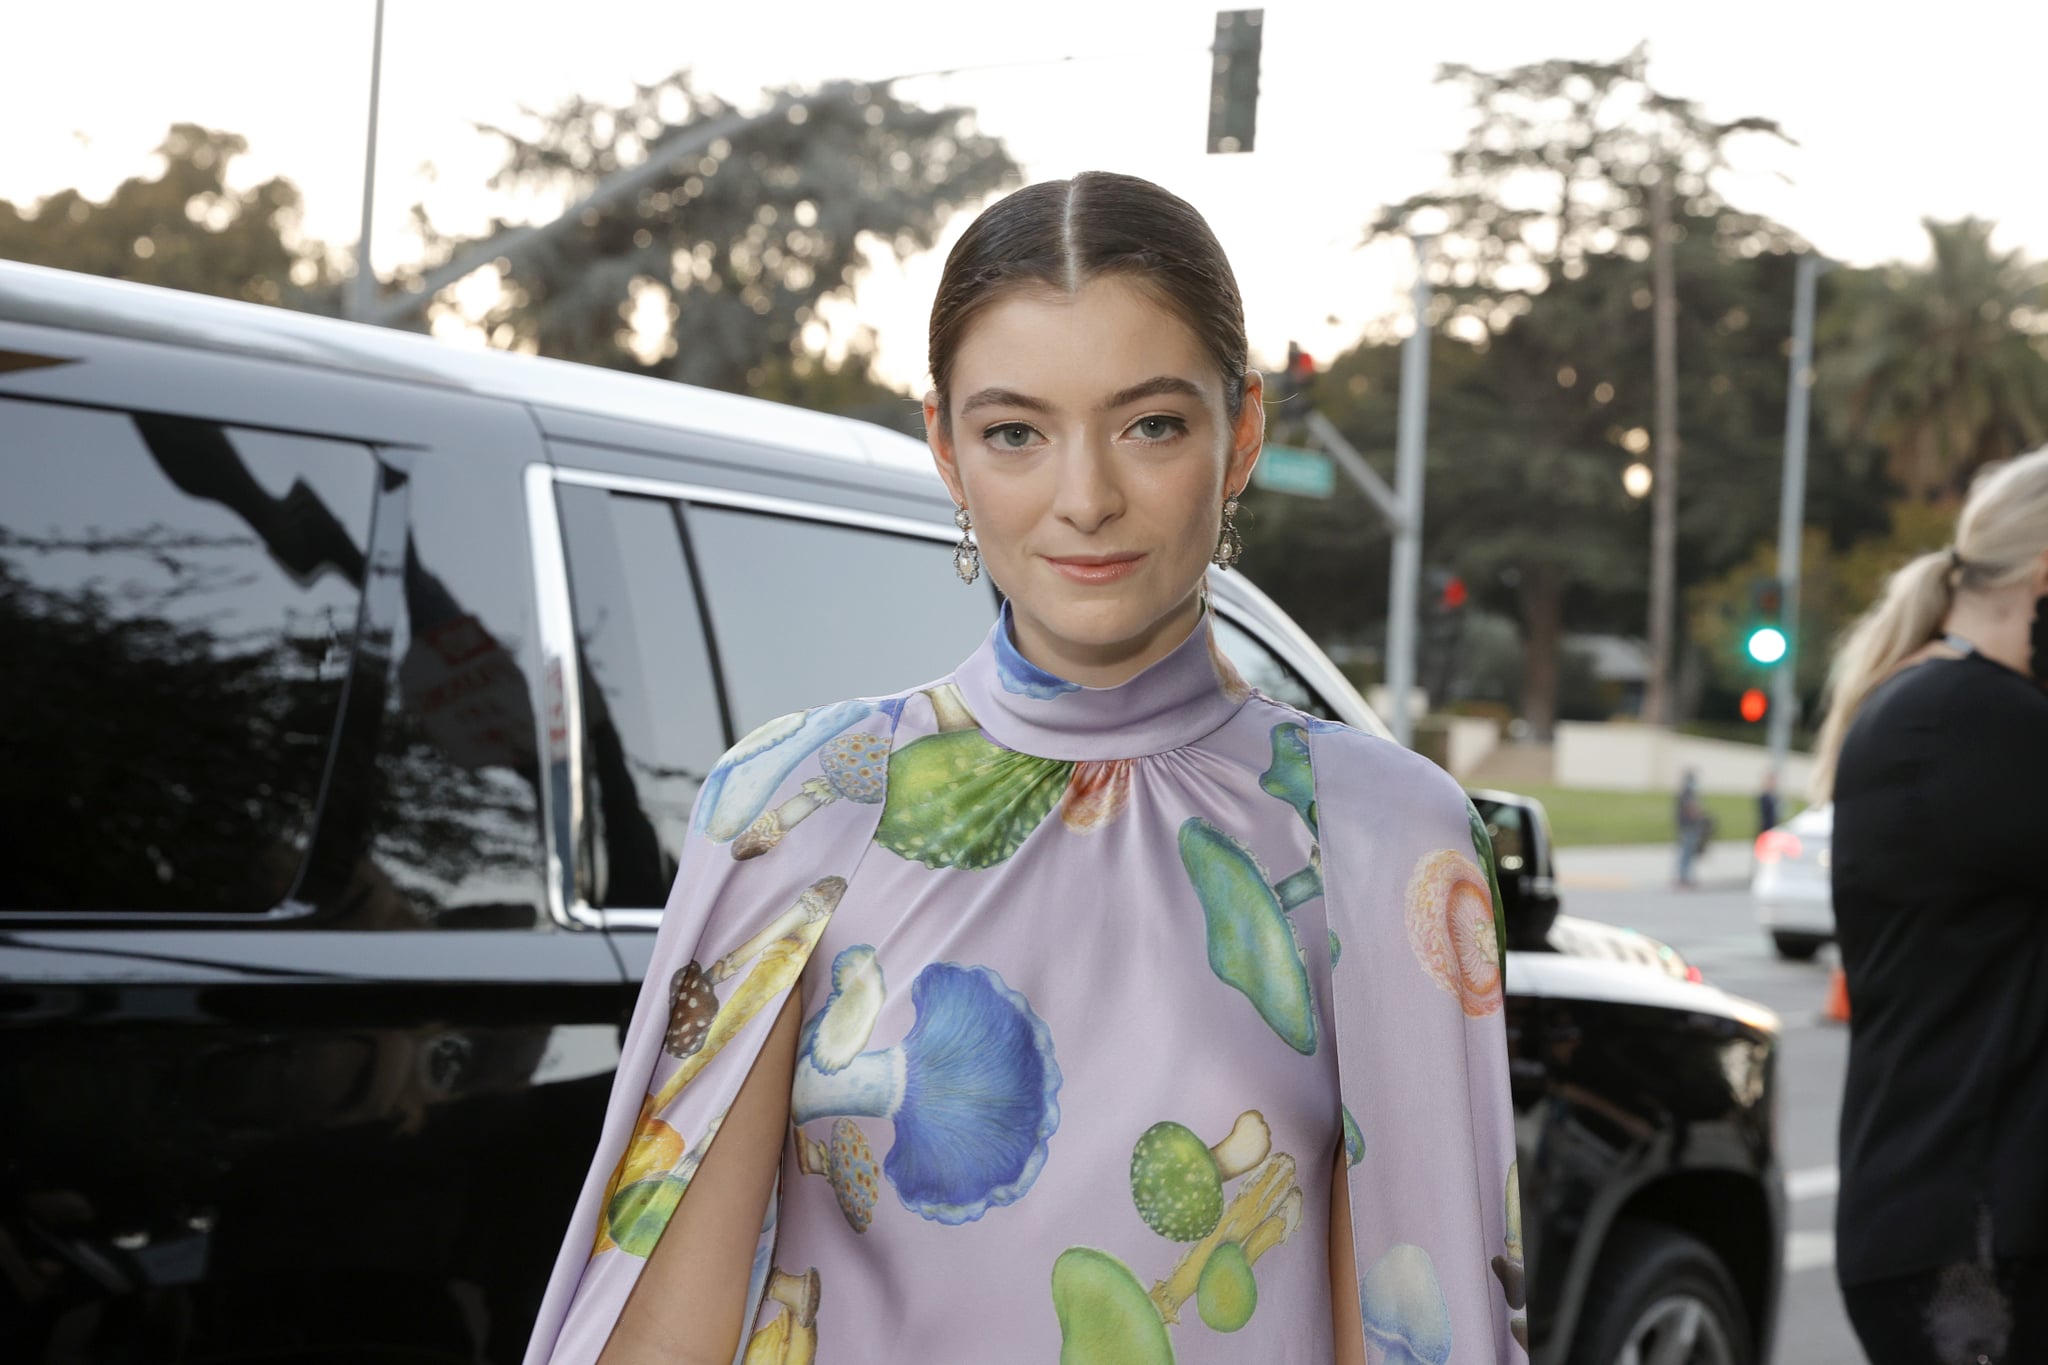 BEVERLY HILLS, CALIFORNIA - SEPTEMBER 30: Lorde attends Variety's Power of Women Presented by Lifetime at Wallis Annenberg Center for the Performing Arts on September 30, 2021 in Beverly Hills, California. (Photo by Amy Sussman/Getty Images for Variety)